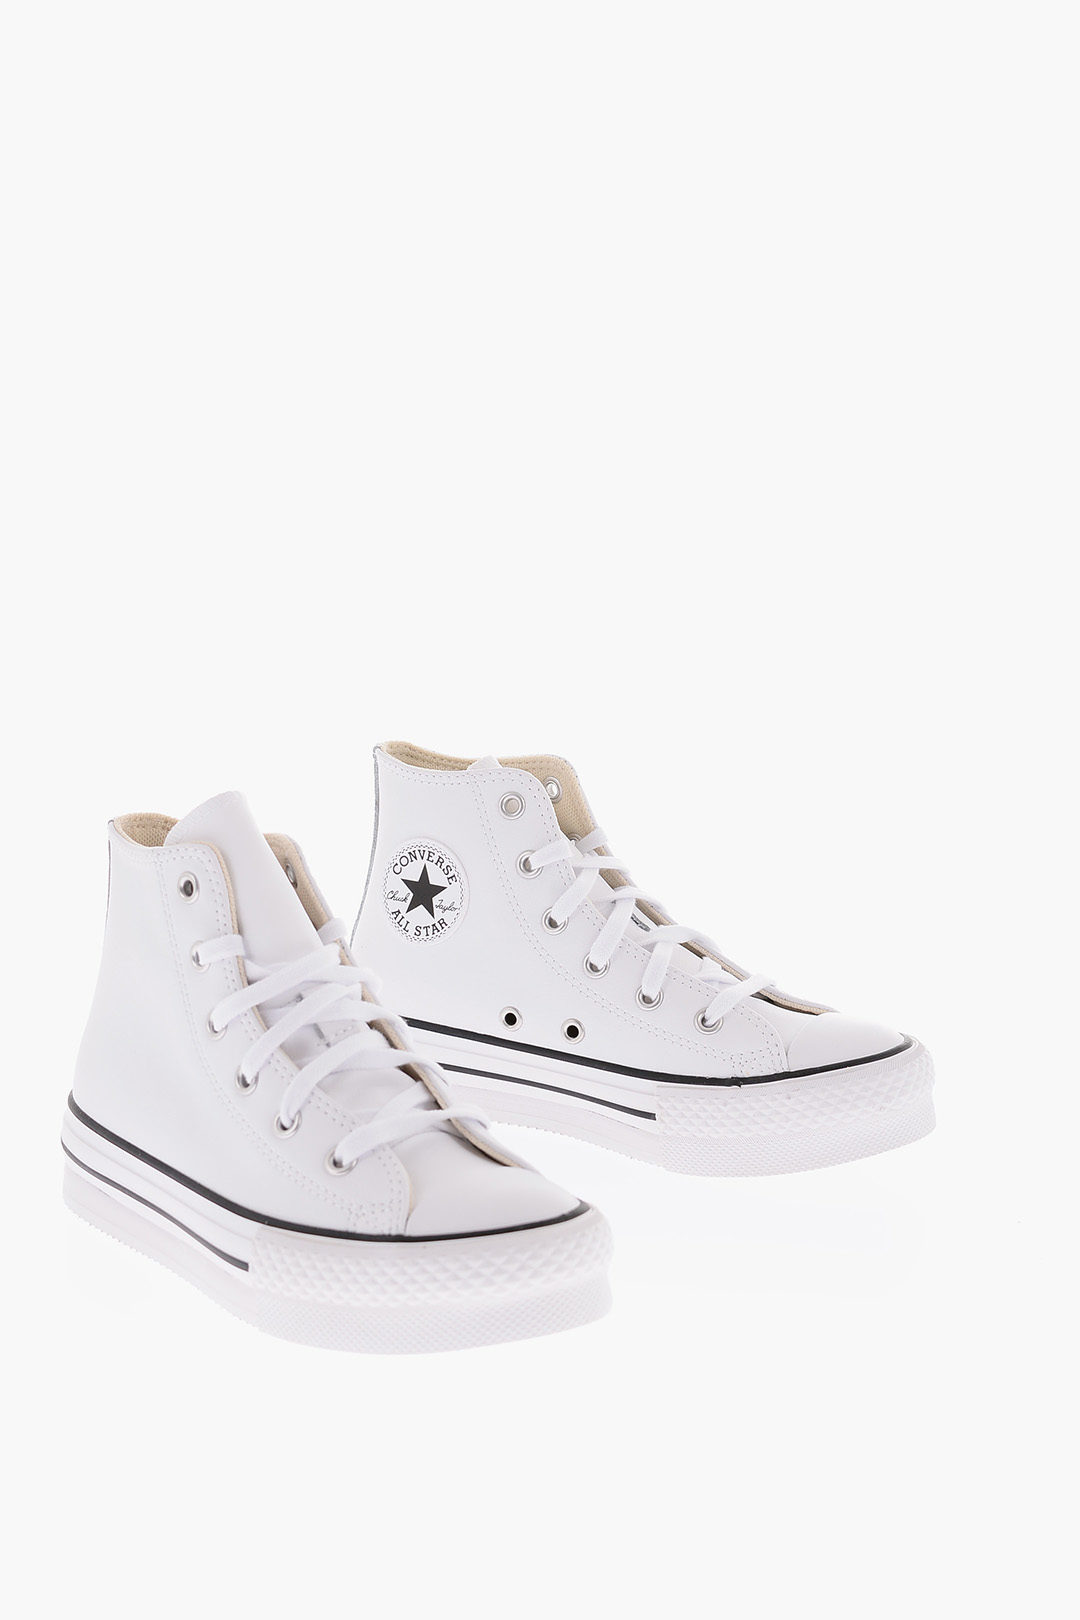 Doorweekt fluit hoofdstad Converse KIDS ALL STAR CHUCK TAYLOR Leather High Top Sneakers boys -  Glamood Outlet